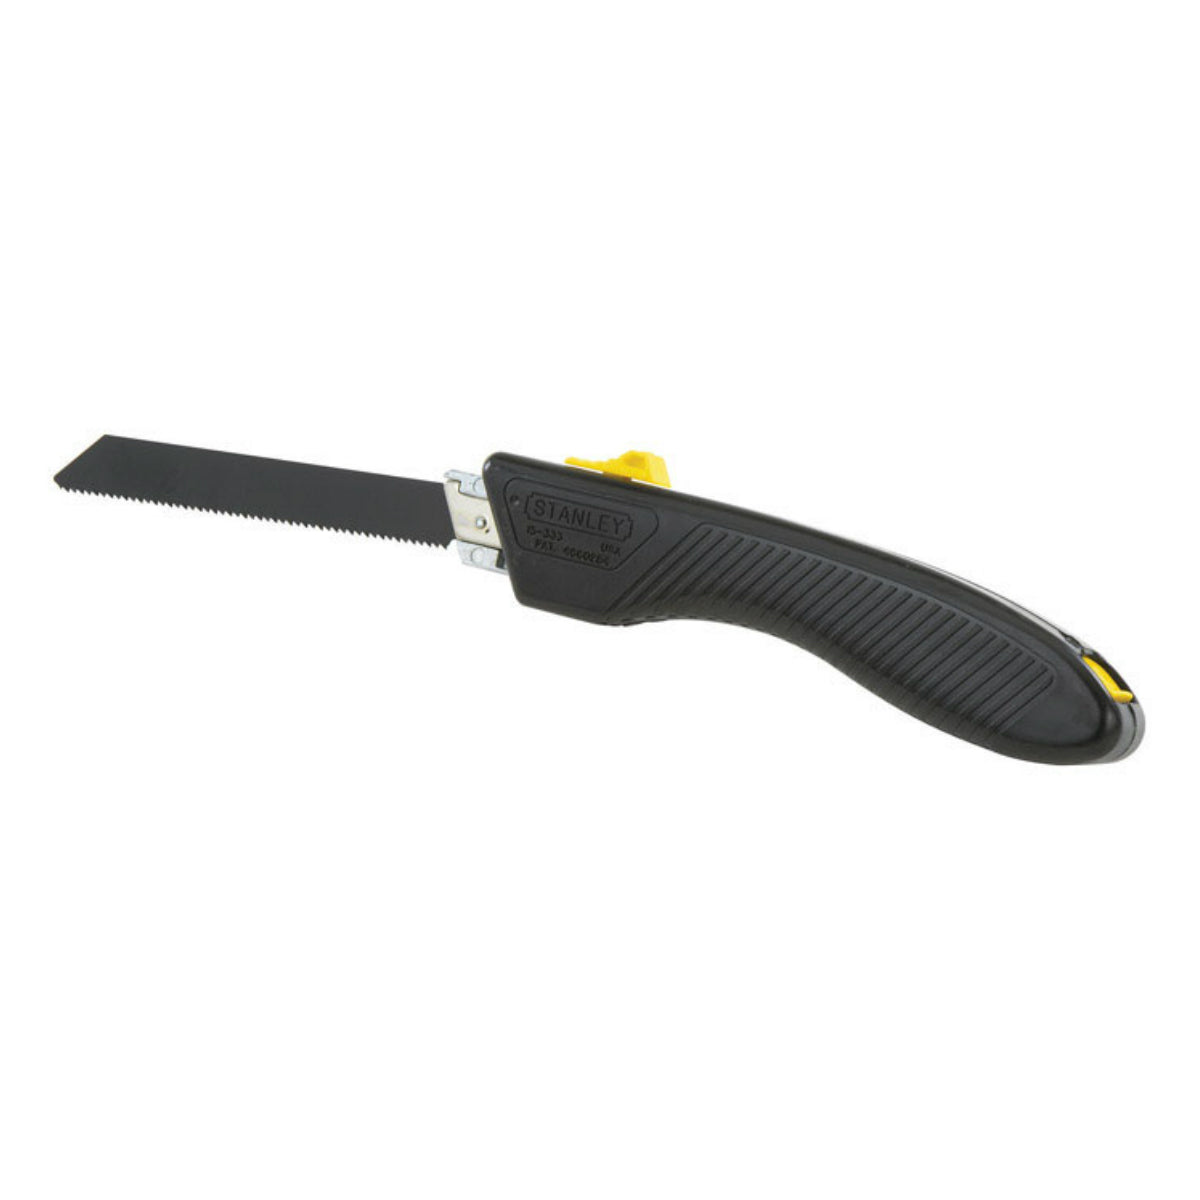 buy saws at cheap rate in bulk. wholesale & retail lawn & garden tools store.